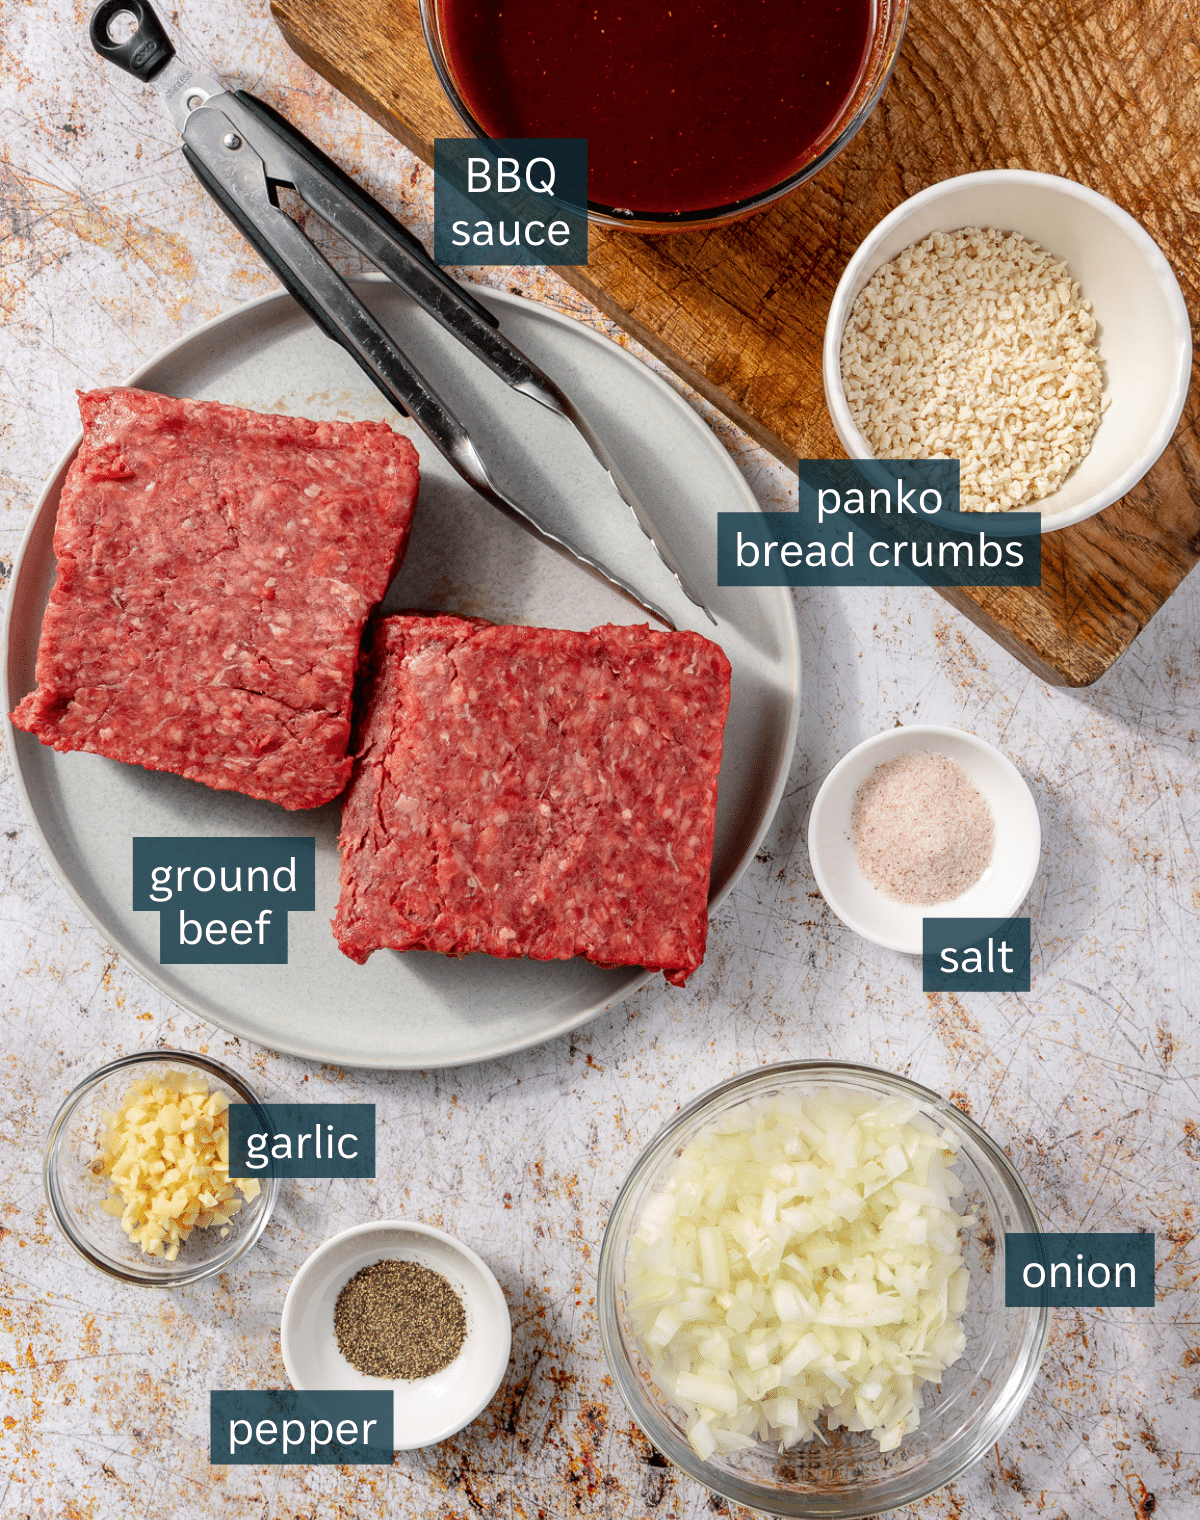 Ingredients for bbq meatballs sit in a variety of bowls and on a wooden chopping block.